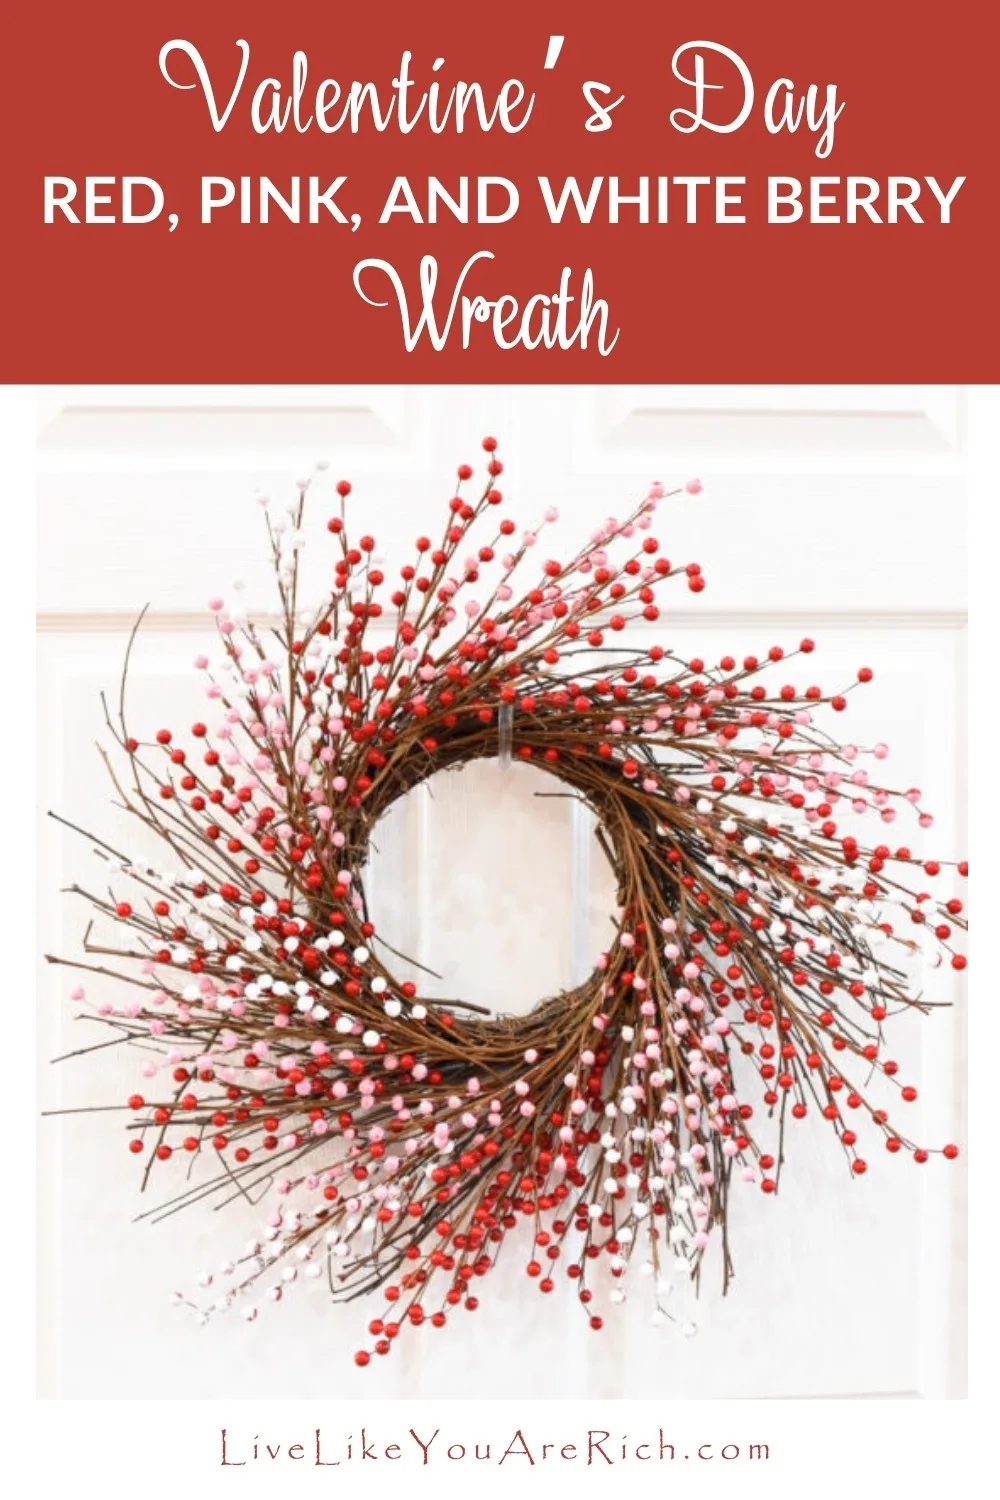 This Valentine’s Day Red, Pink, and White Berry Wreath is one of my favorite wreaths I’ve ever made. I love the natural yet feminine vibe. I love its shape and simplicity. Sometimes Valentine’s Day decor is a little overly plastic and cheesy. I really like subtleness of this wreath. 